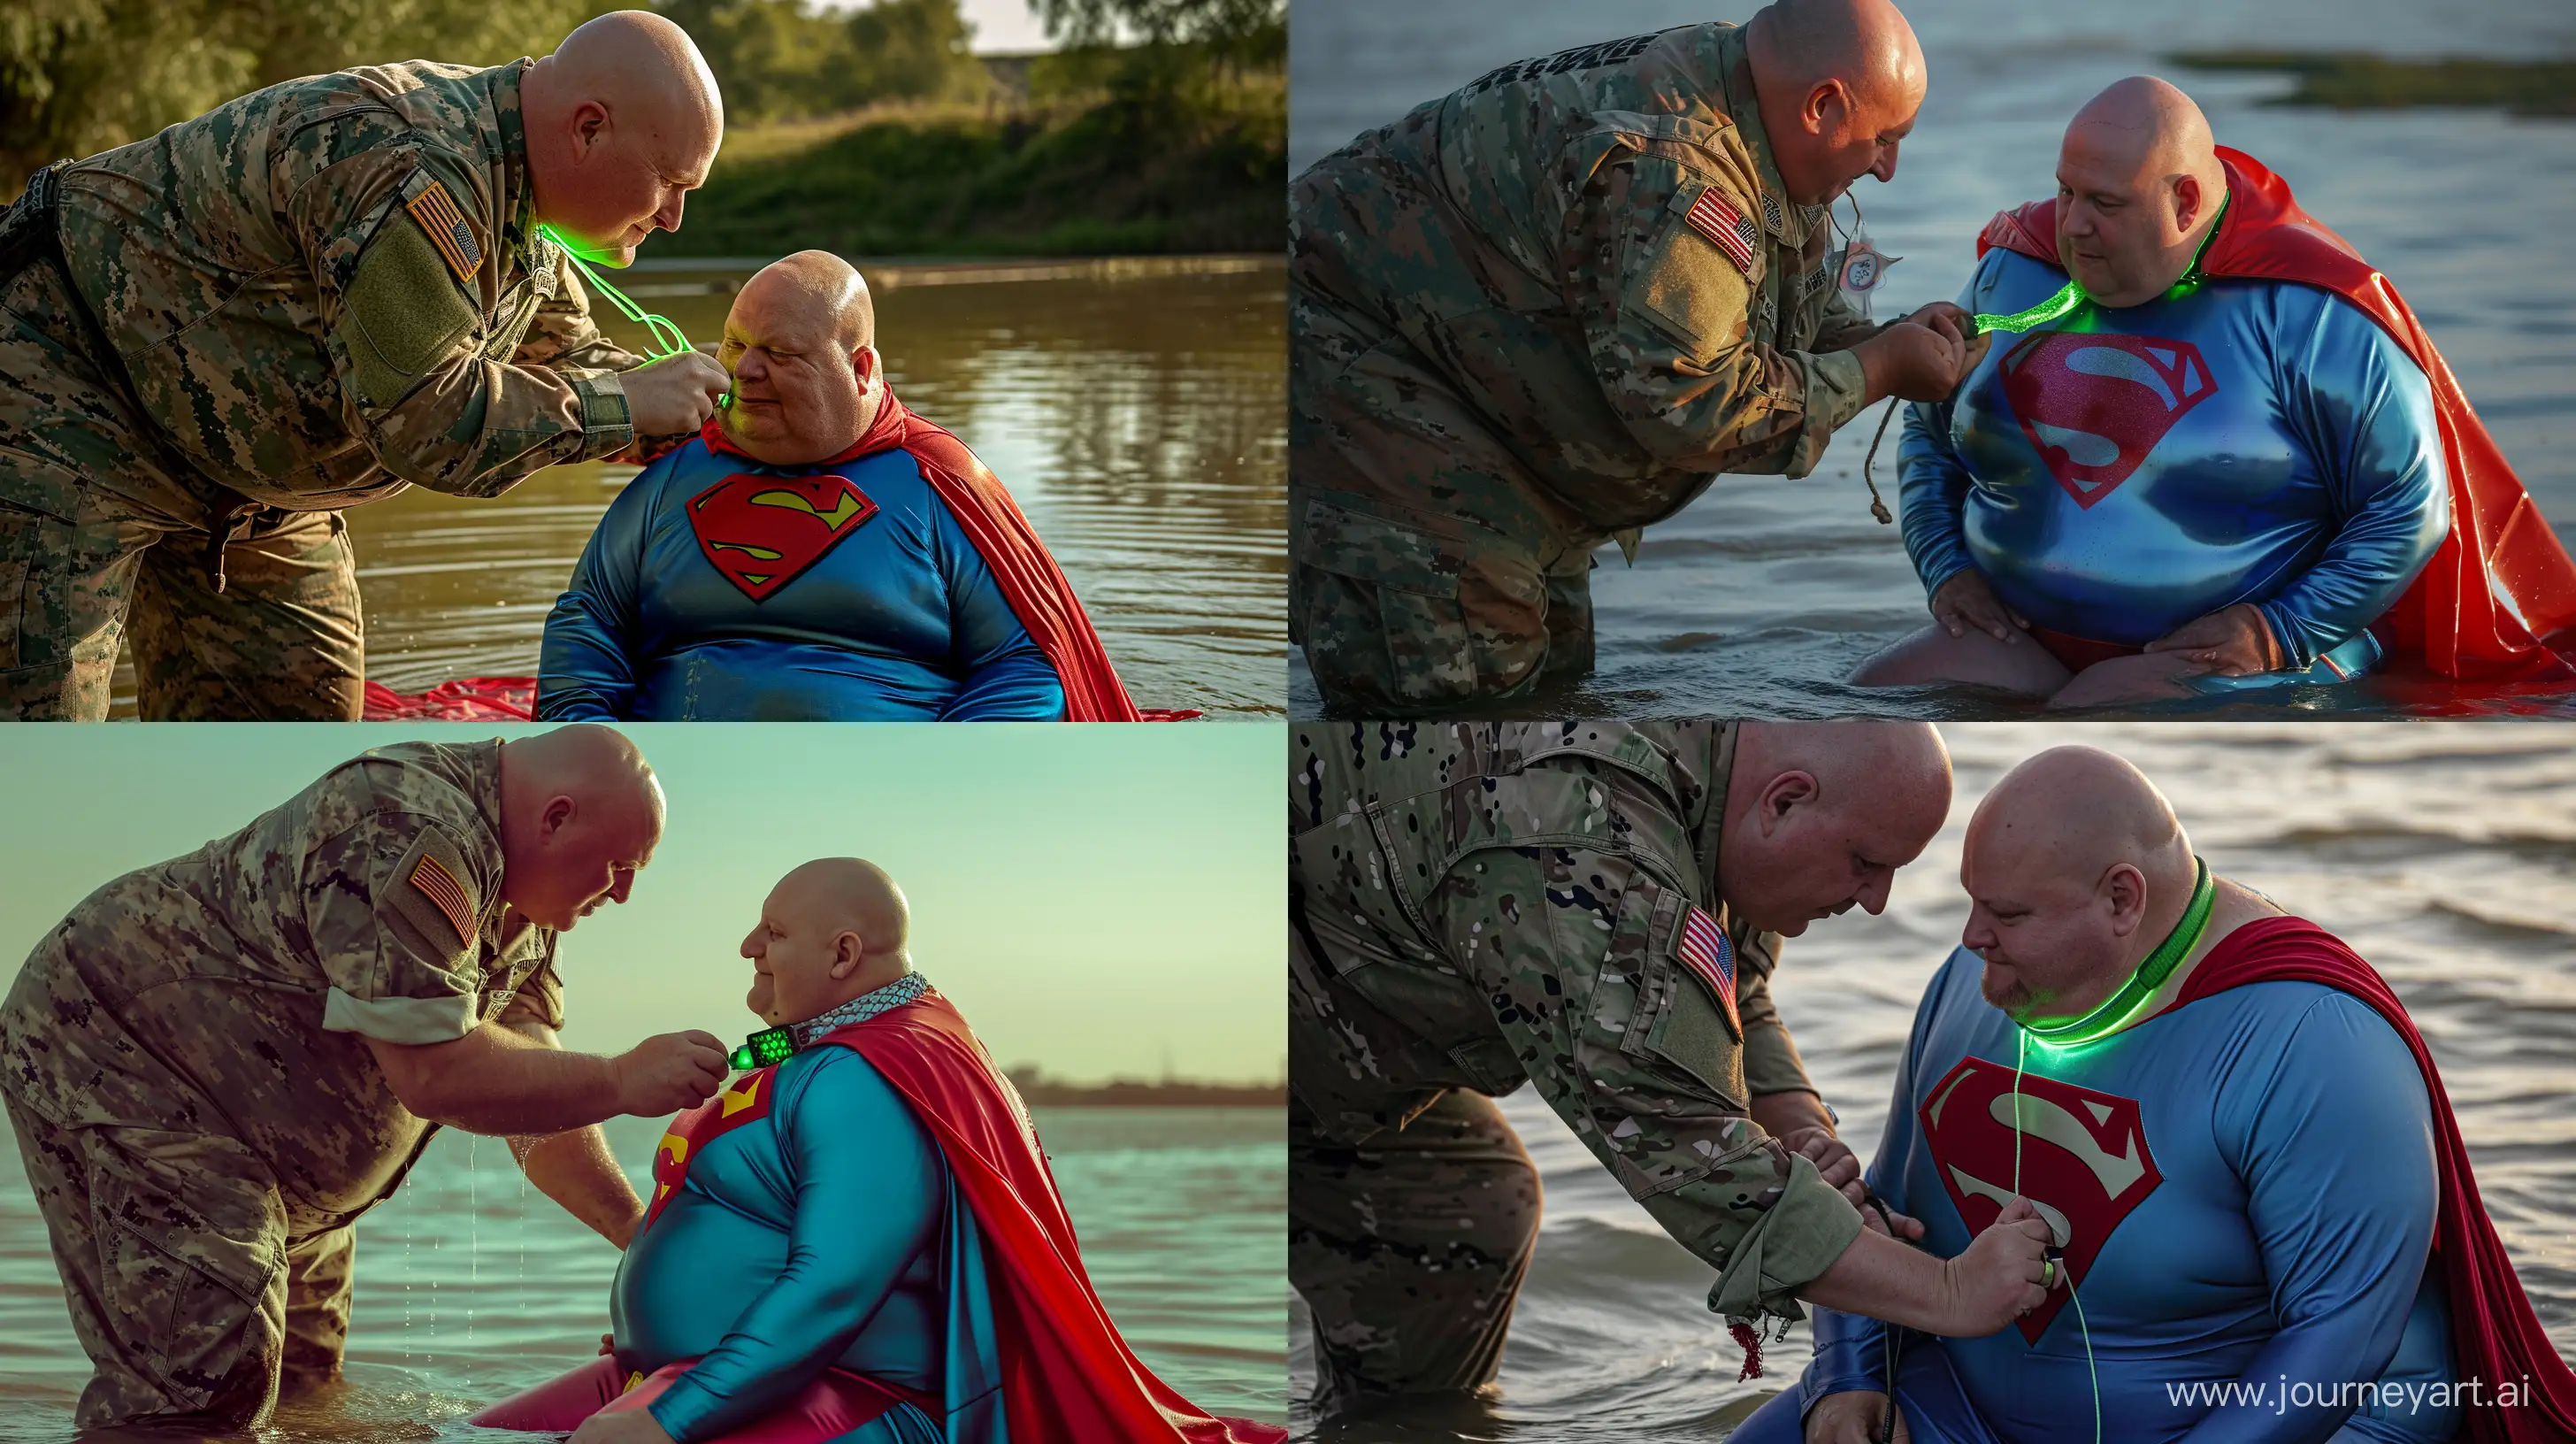 Elderly-Mens-Playful-Water-Scene-with-Military-Collar-and-Superman-Costume